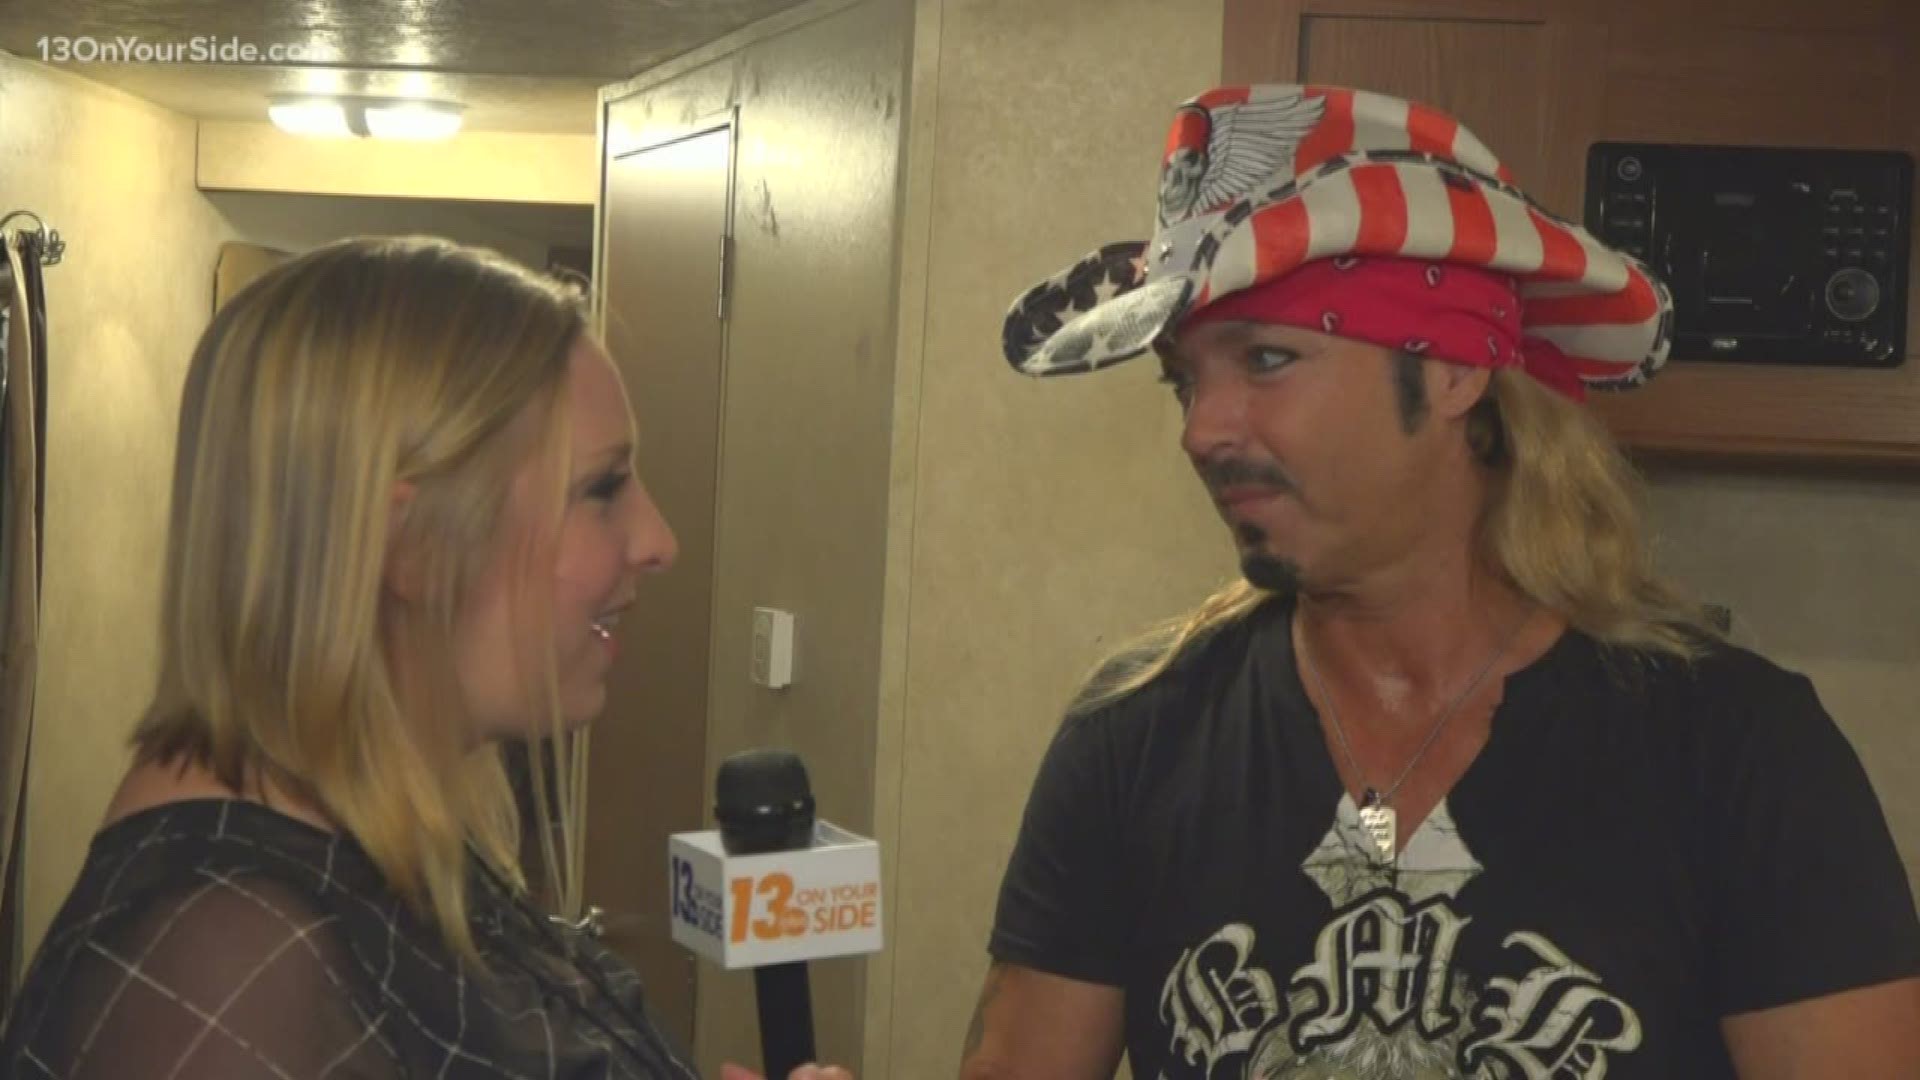 13 ON YOUR SIDE's Alana Nehring got a chance to chat with Bret Michaels, one of the headliners for Muskegon 150 and what he's going to be doing for  the community's veterans.